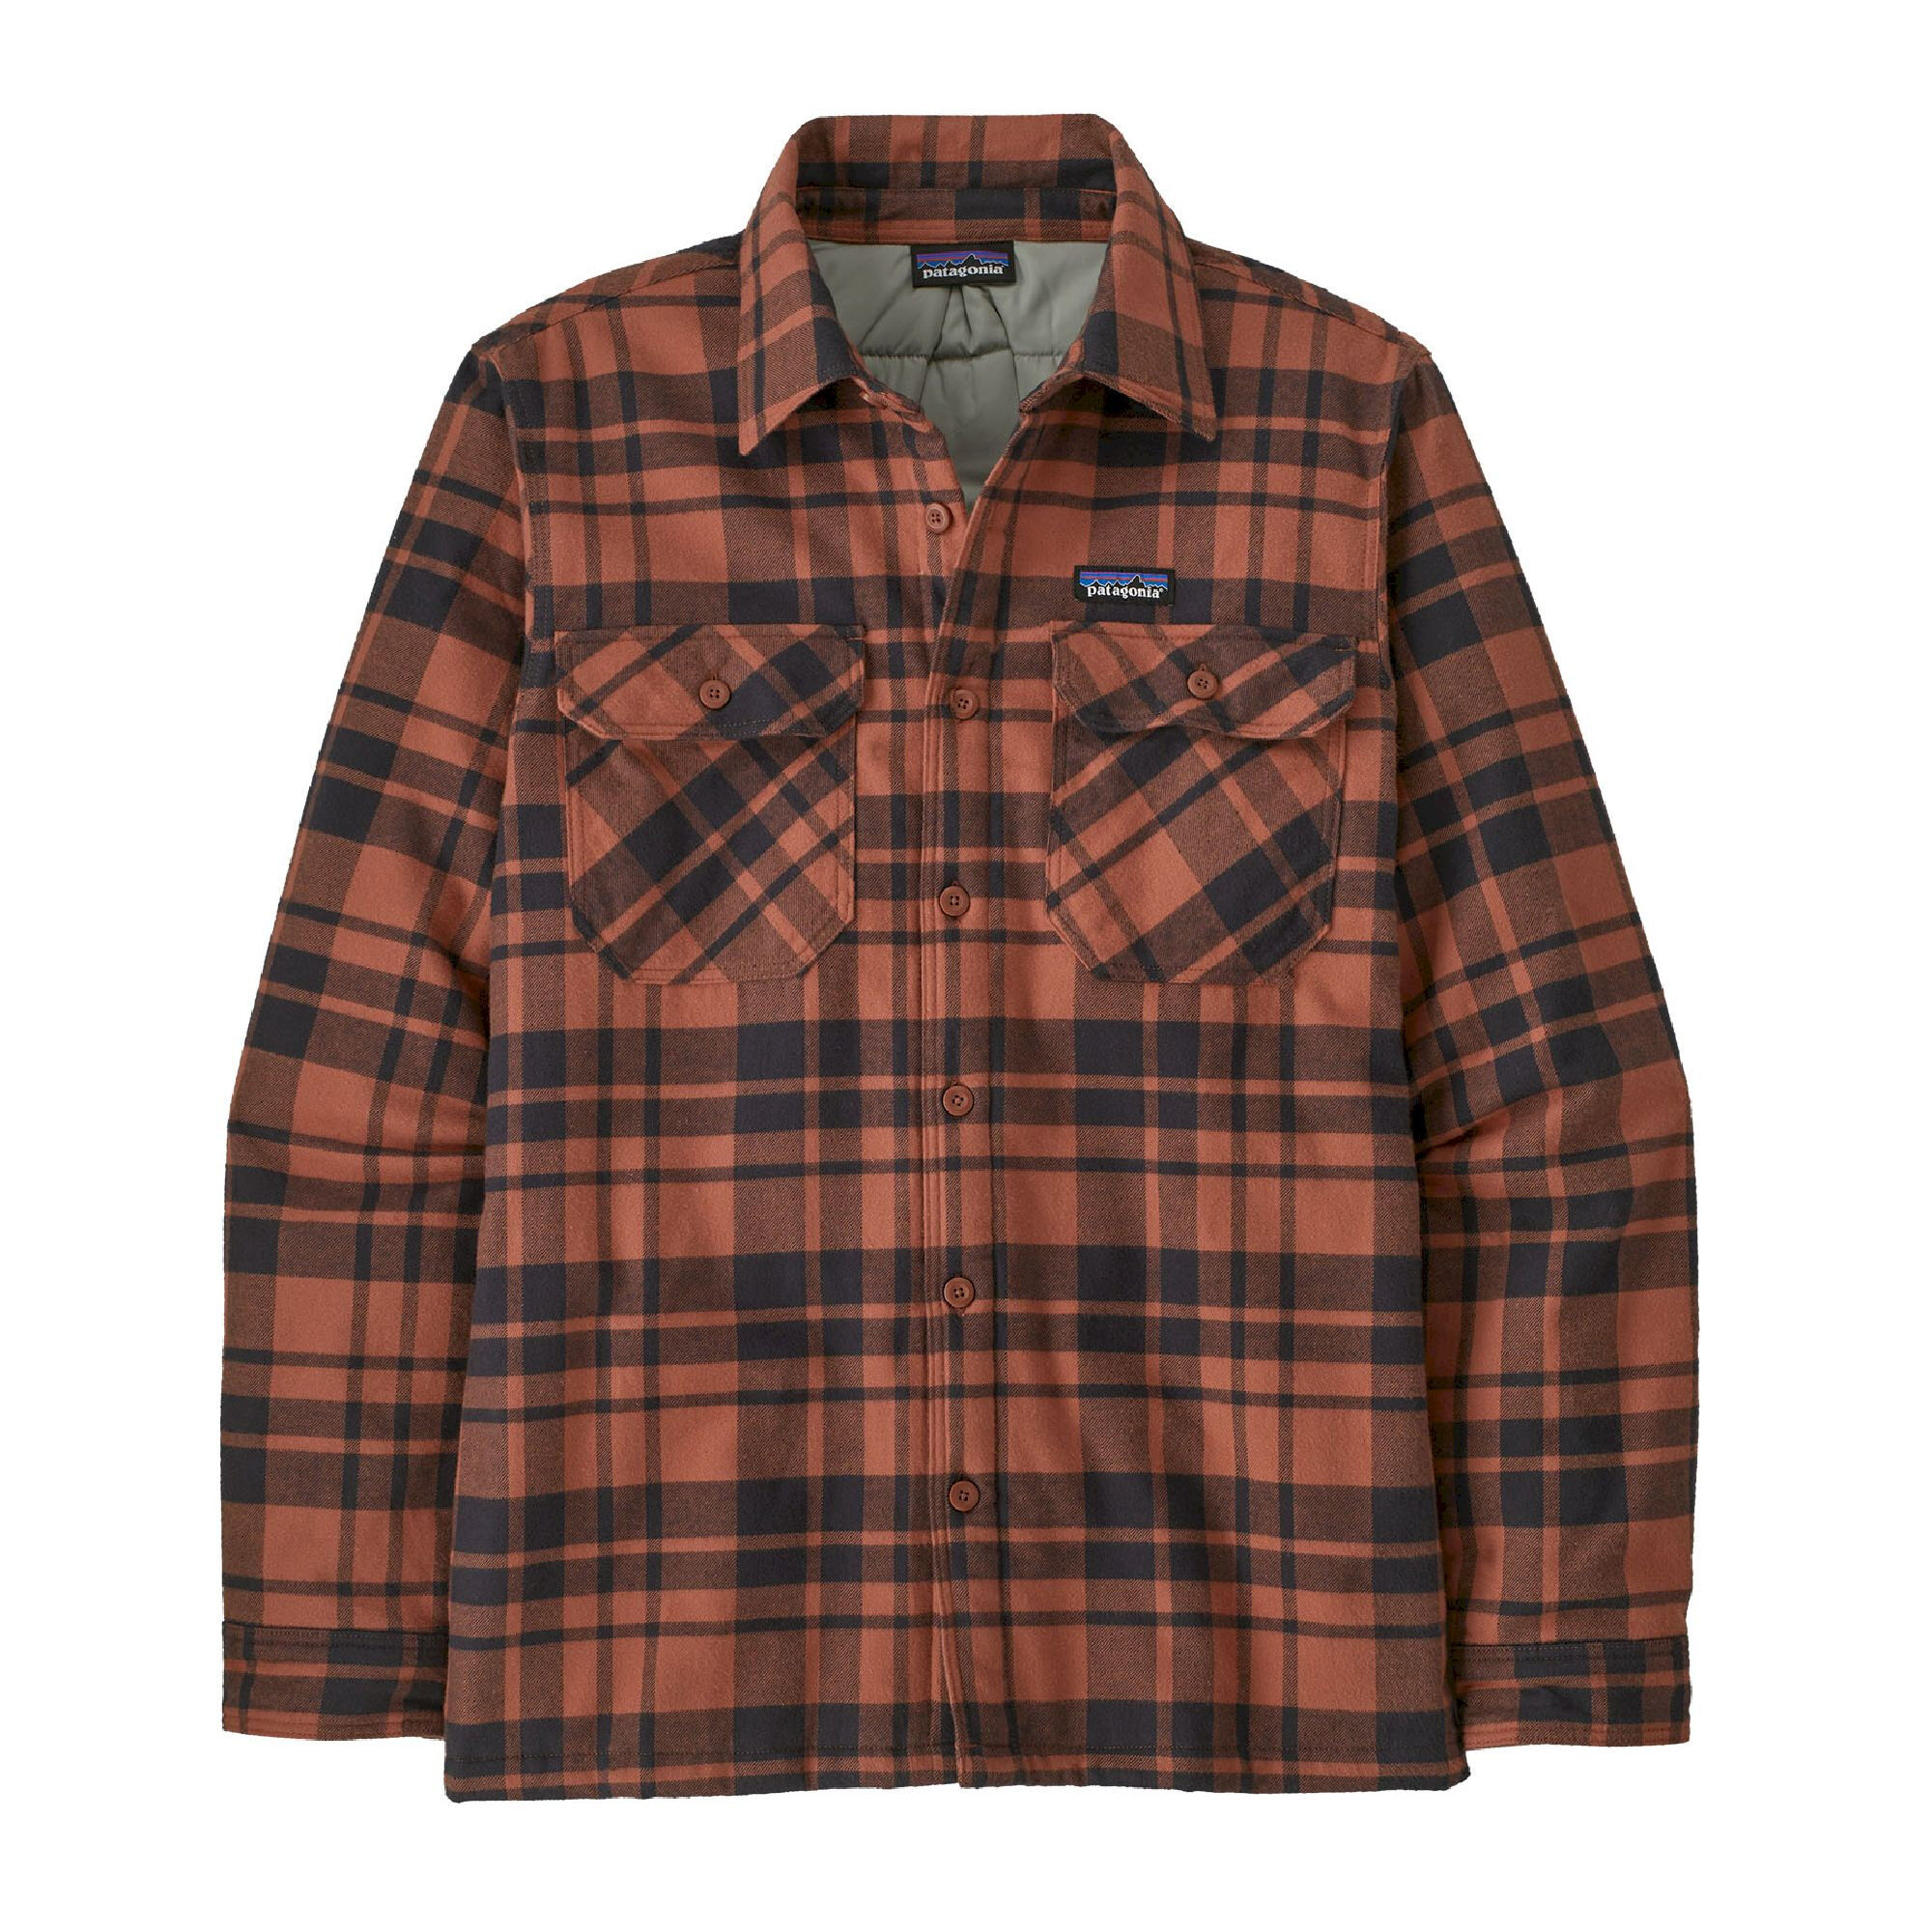 Patagonia Insulated Organic Cotton MW Fjord Flannel Shirt - Shirt - Men's